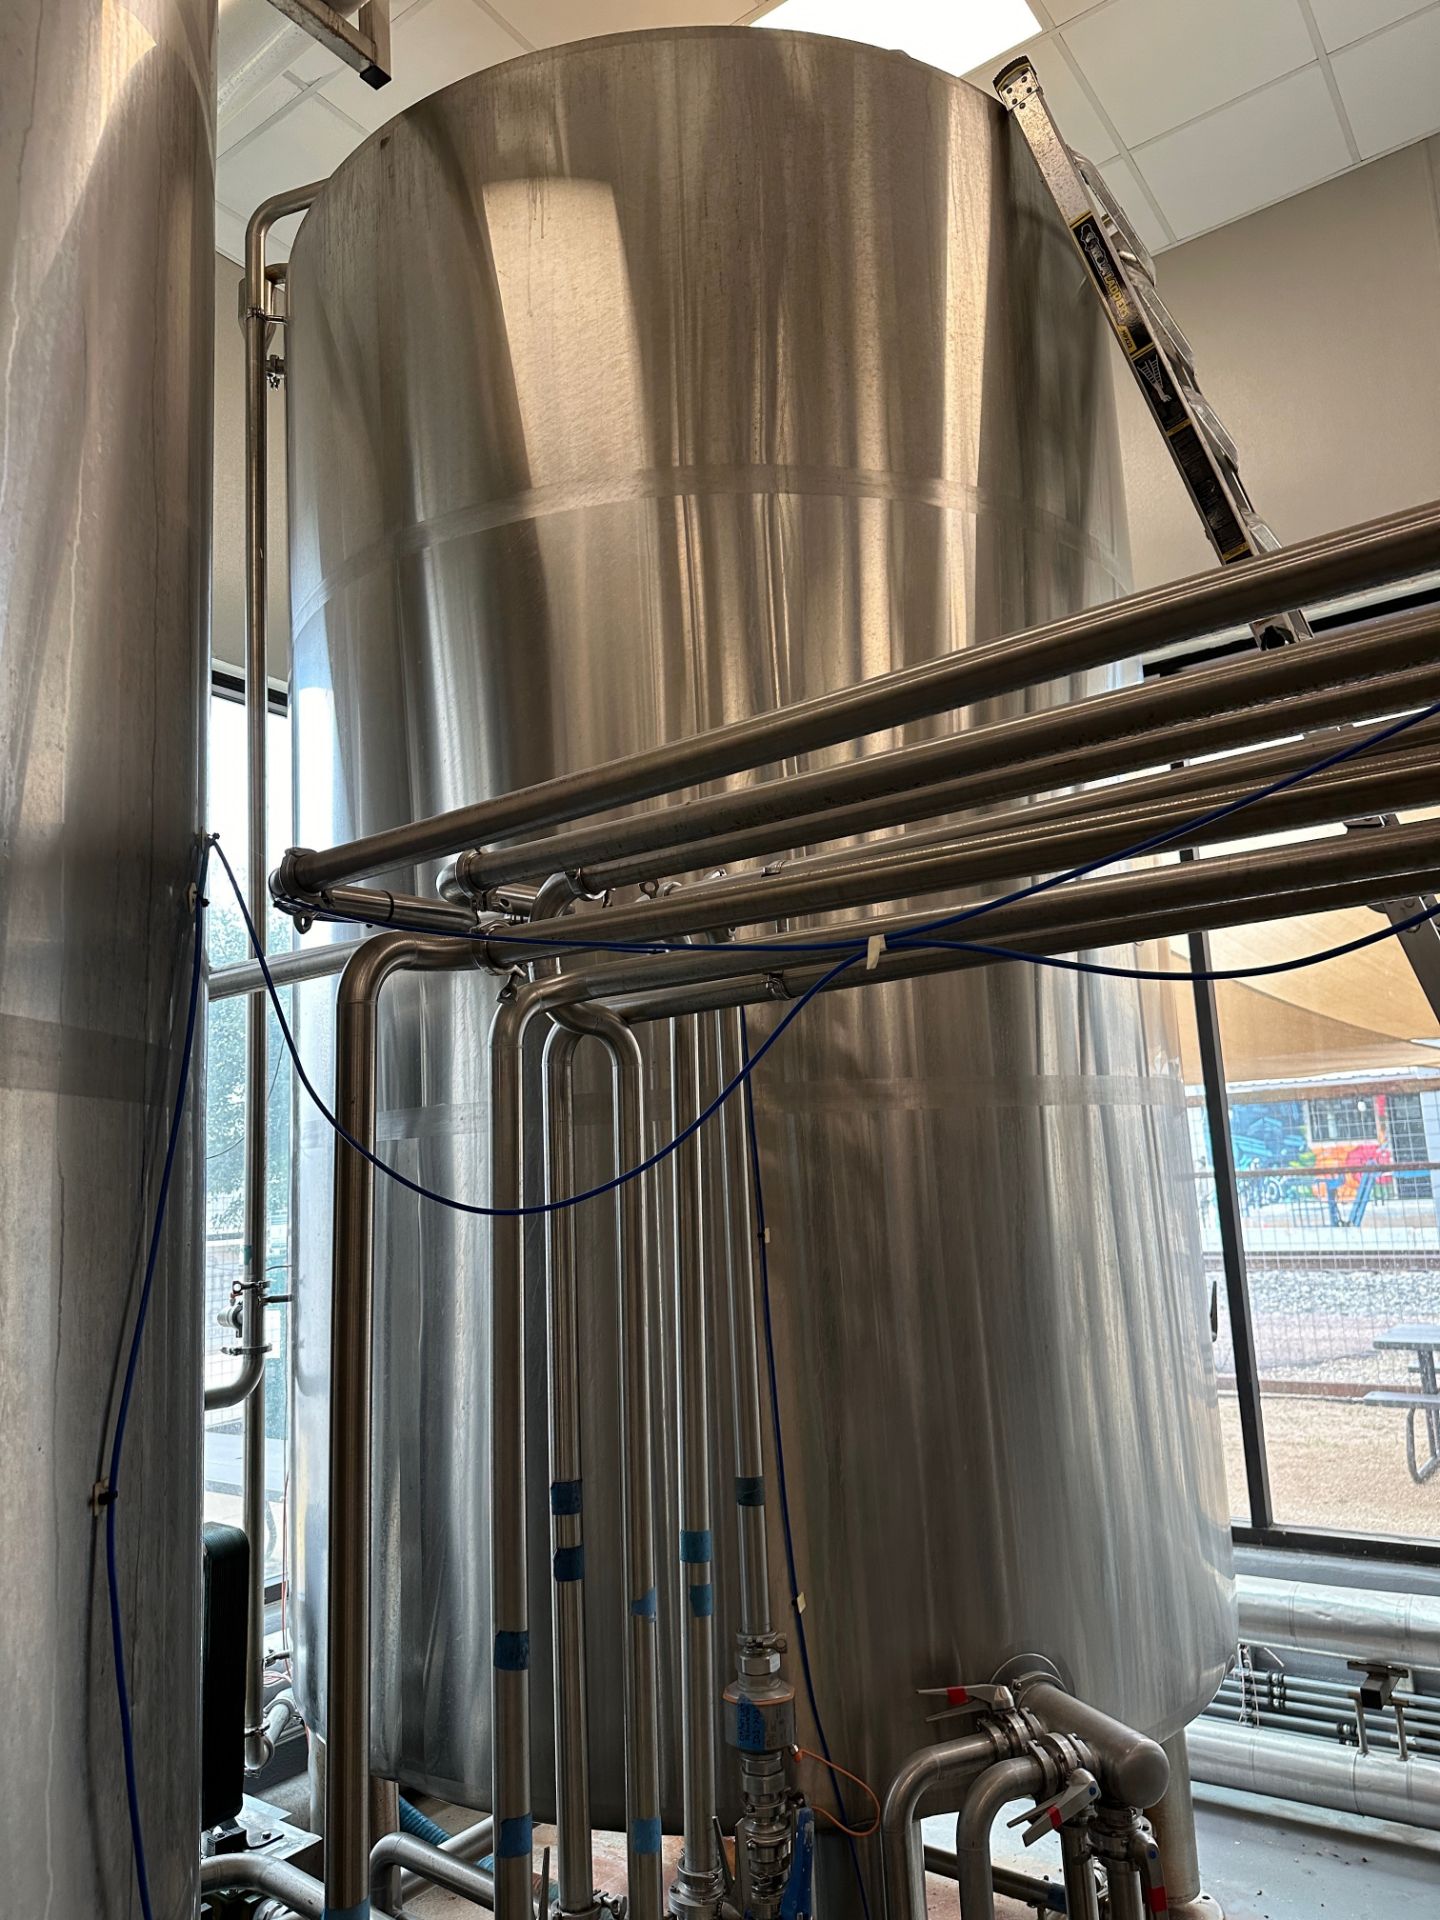 Complete 40 BBL Microbrewery - 40 BBL Deutsche 4-Vessel Brewhouse, Tanks, Can Line - See Description - Image 25 of 335